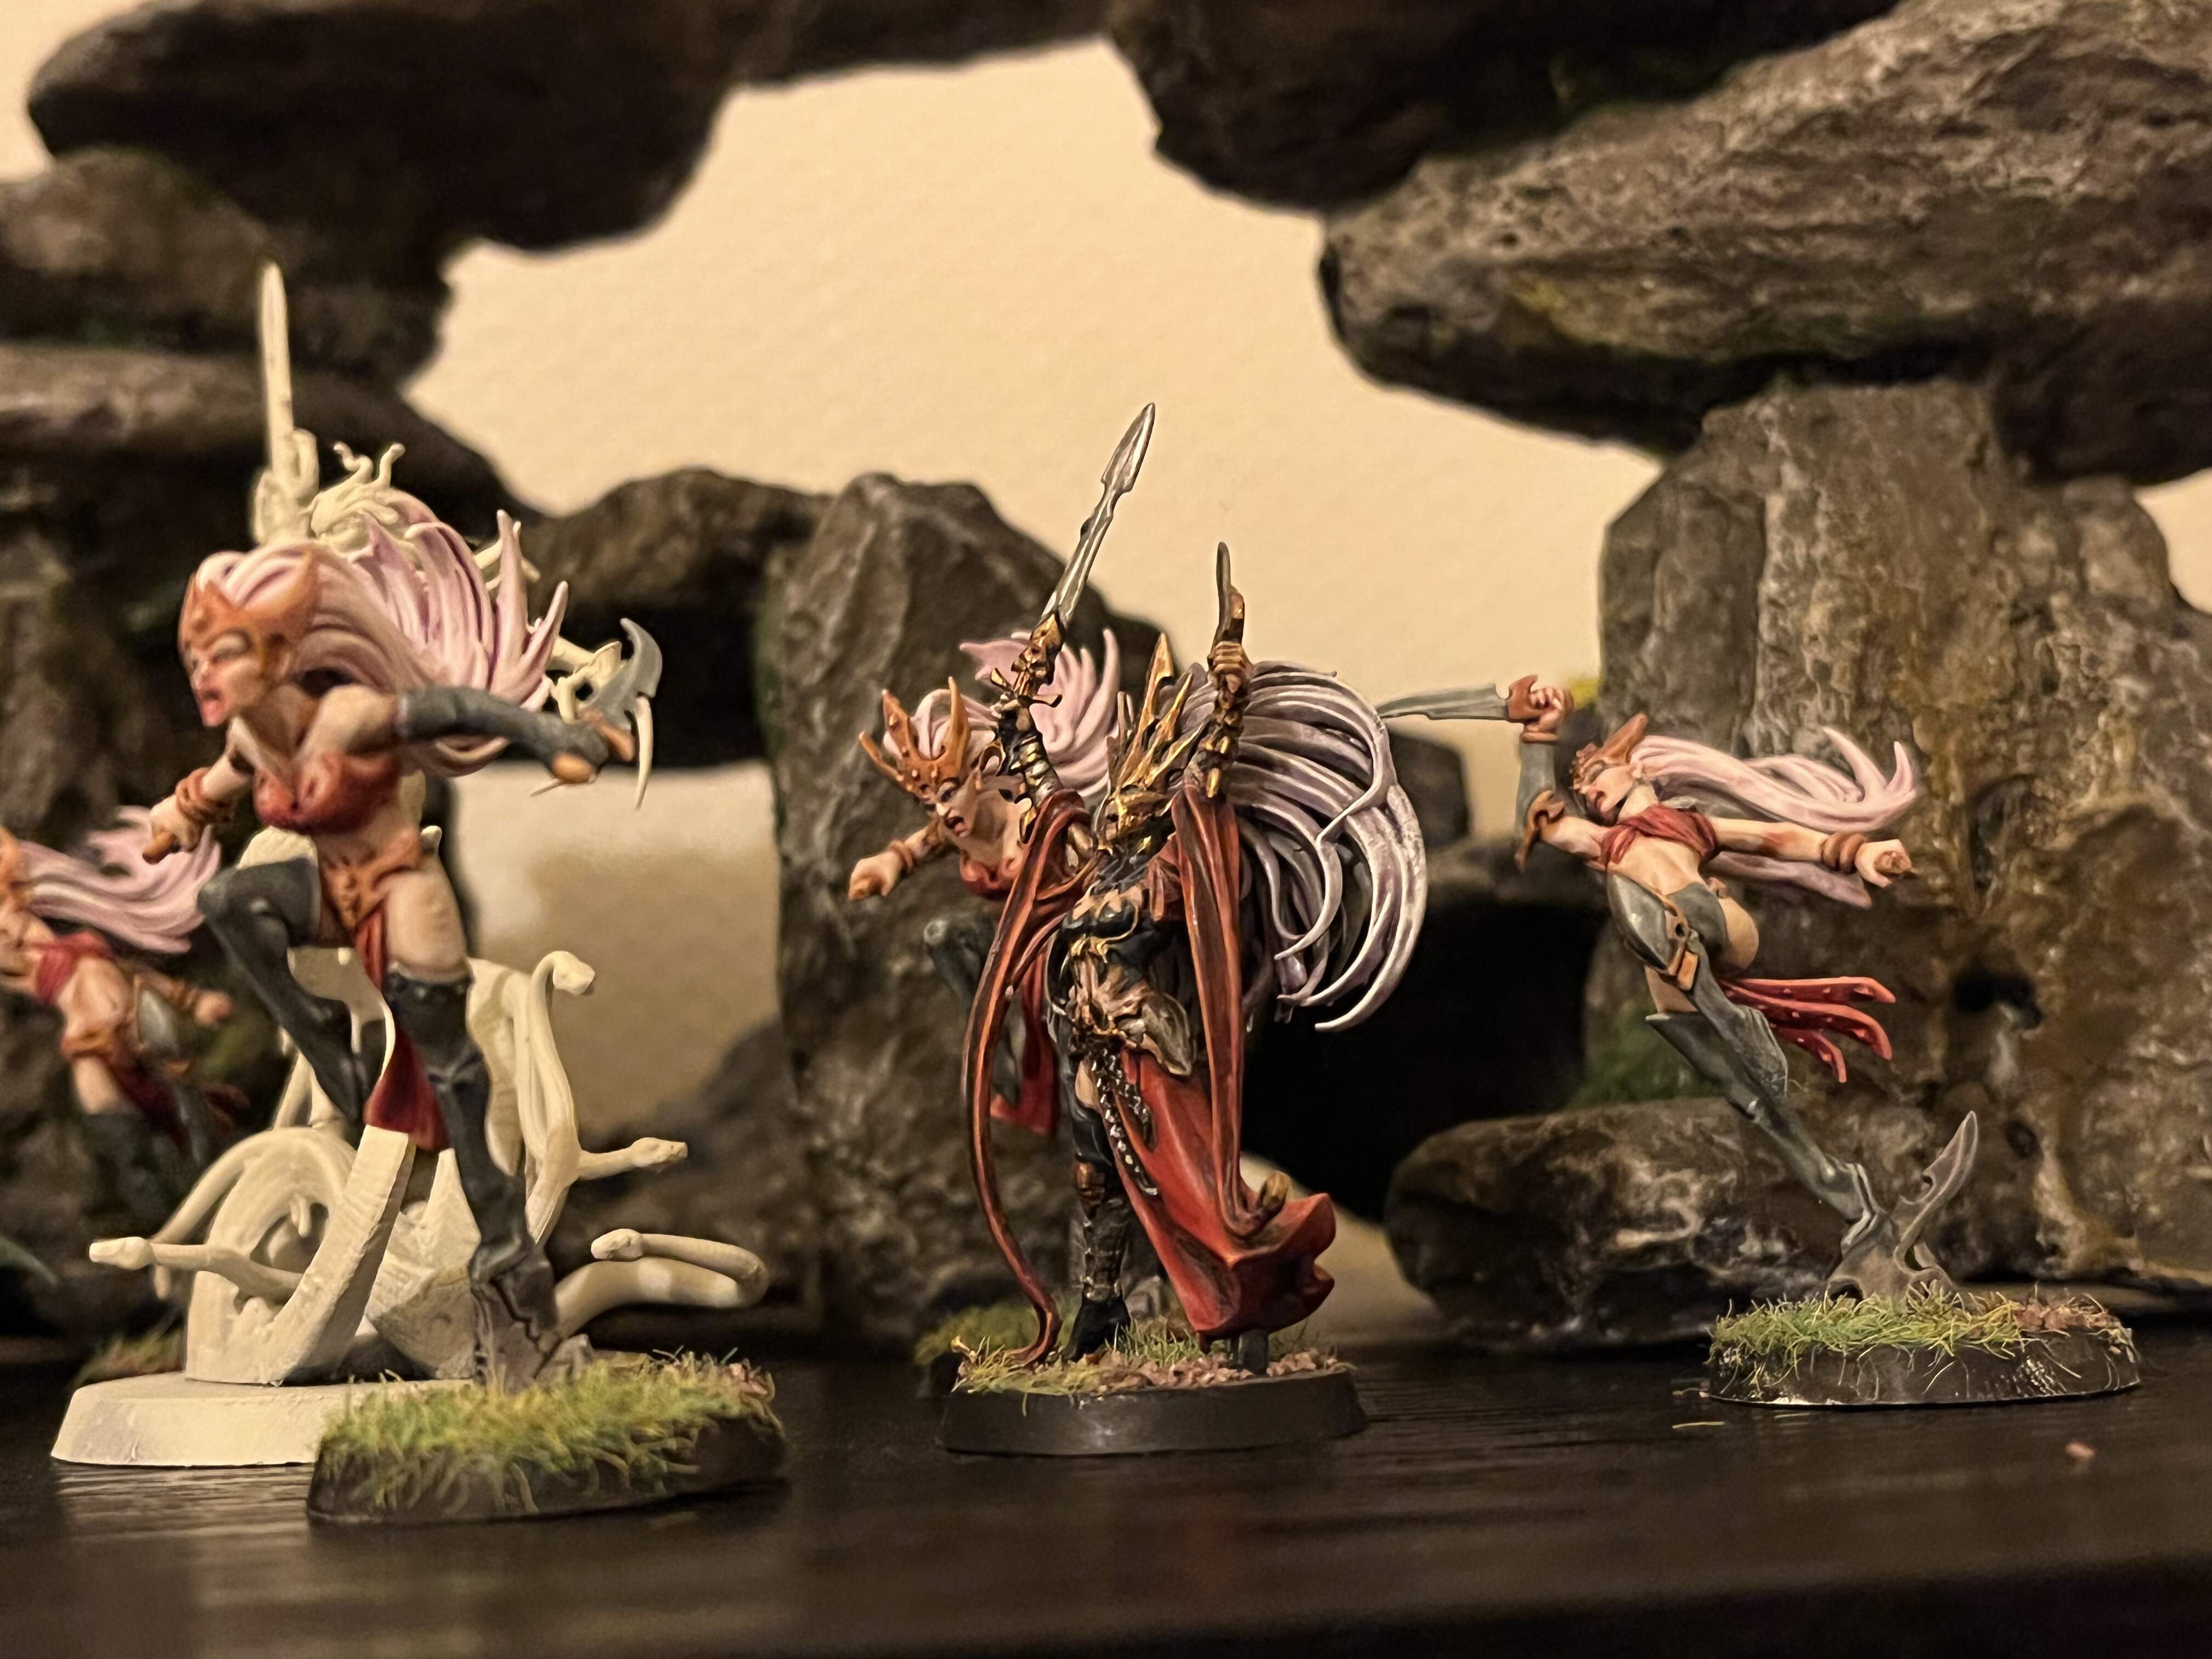 "Daughters of Khaine warcry warband"